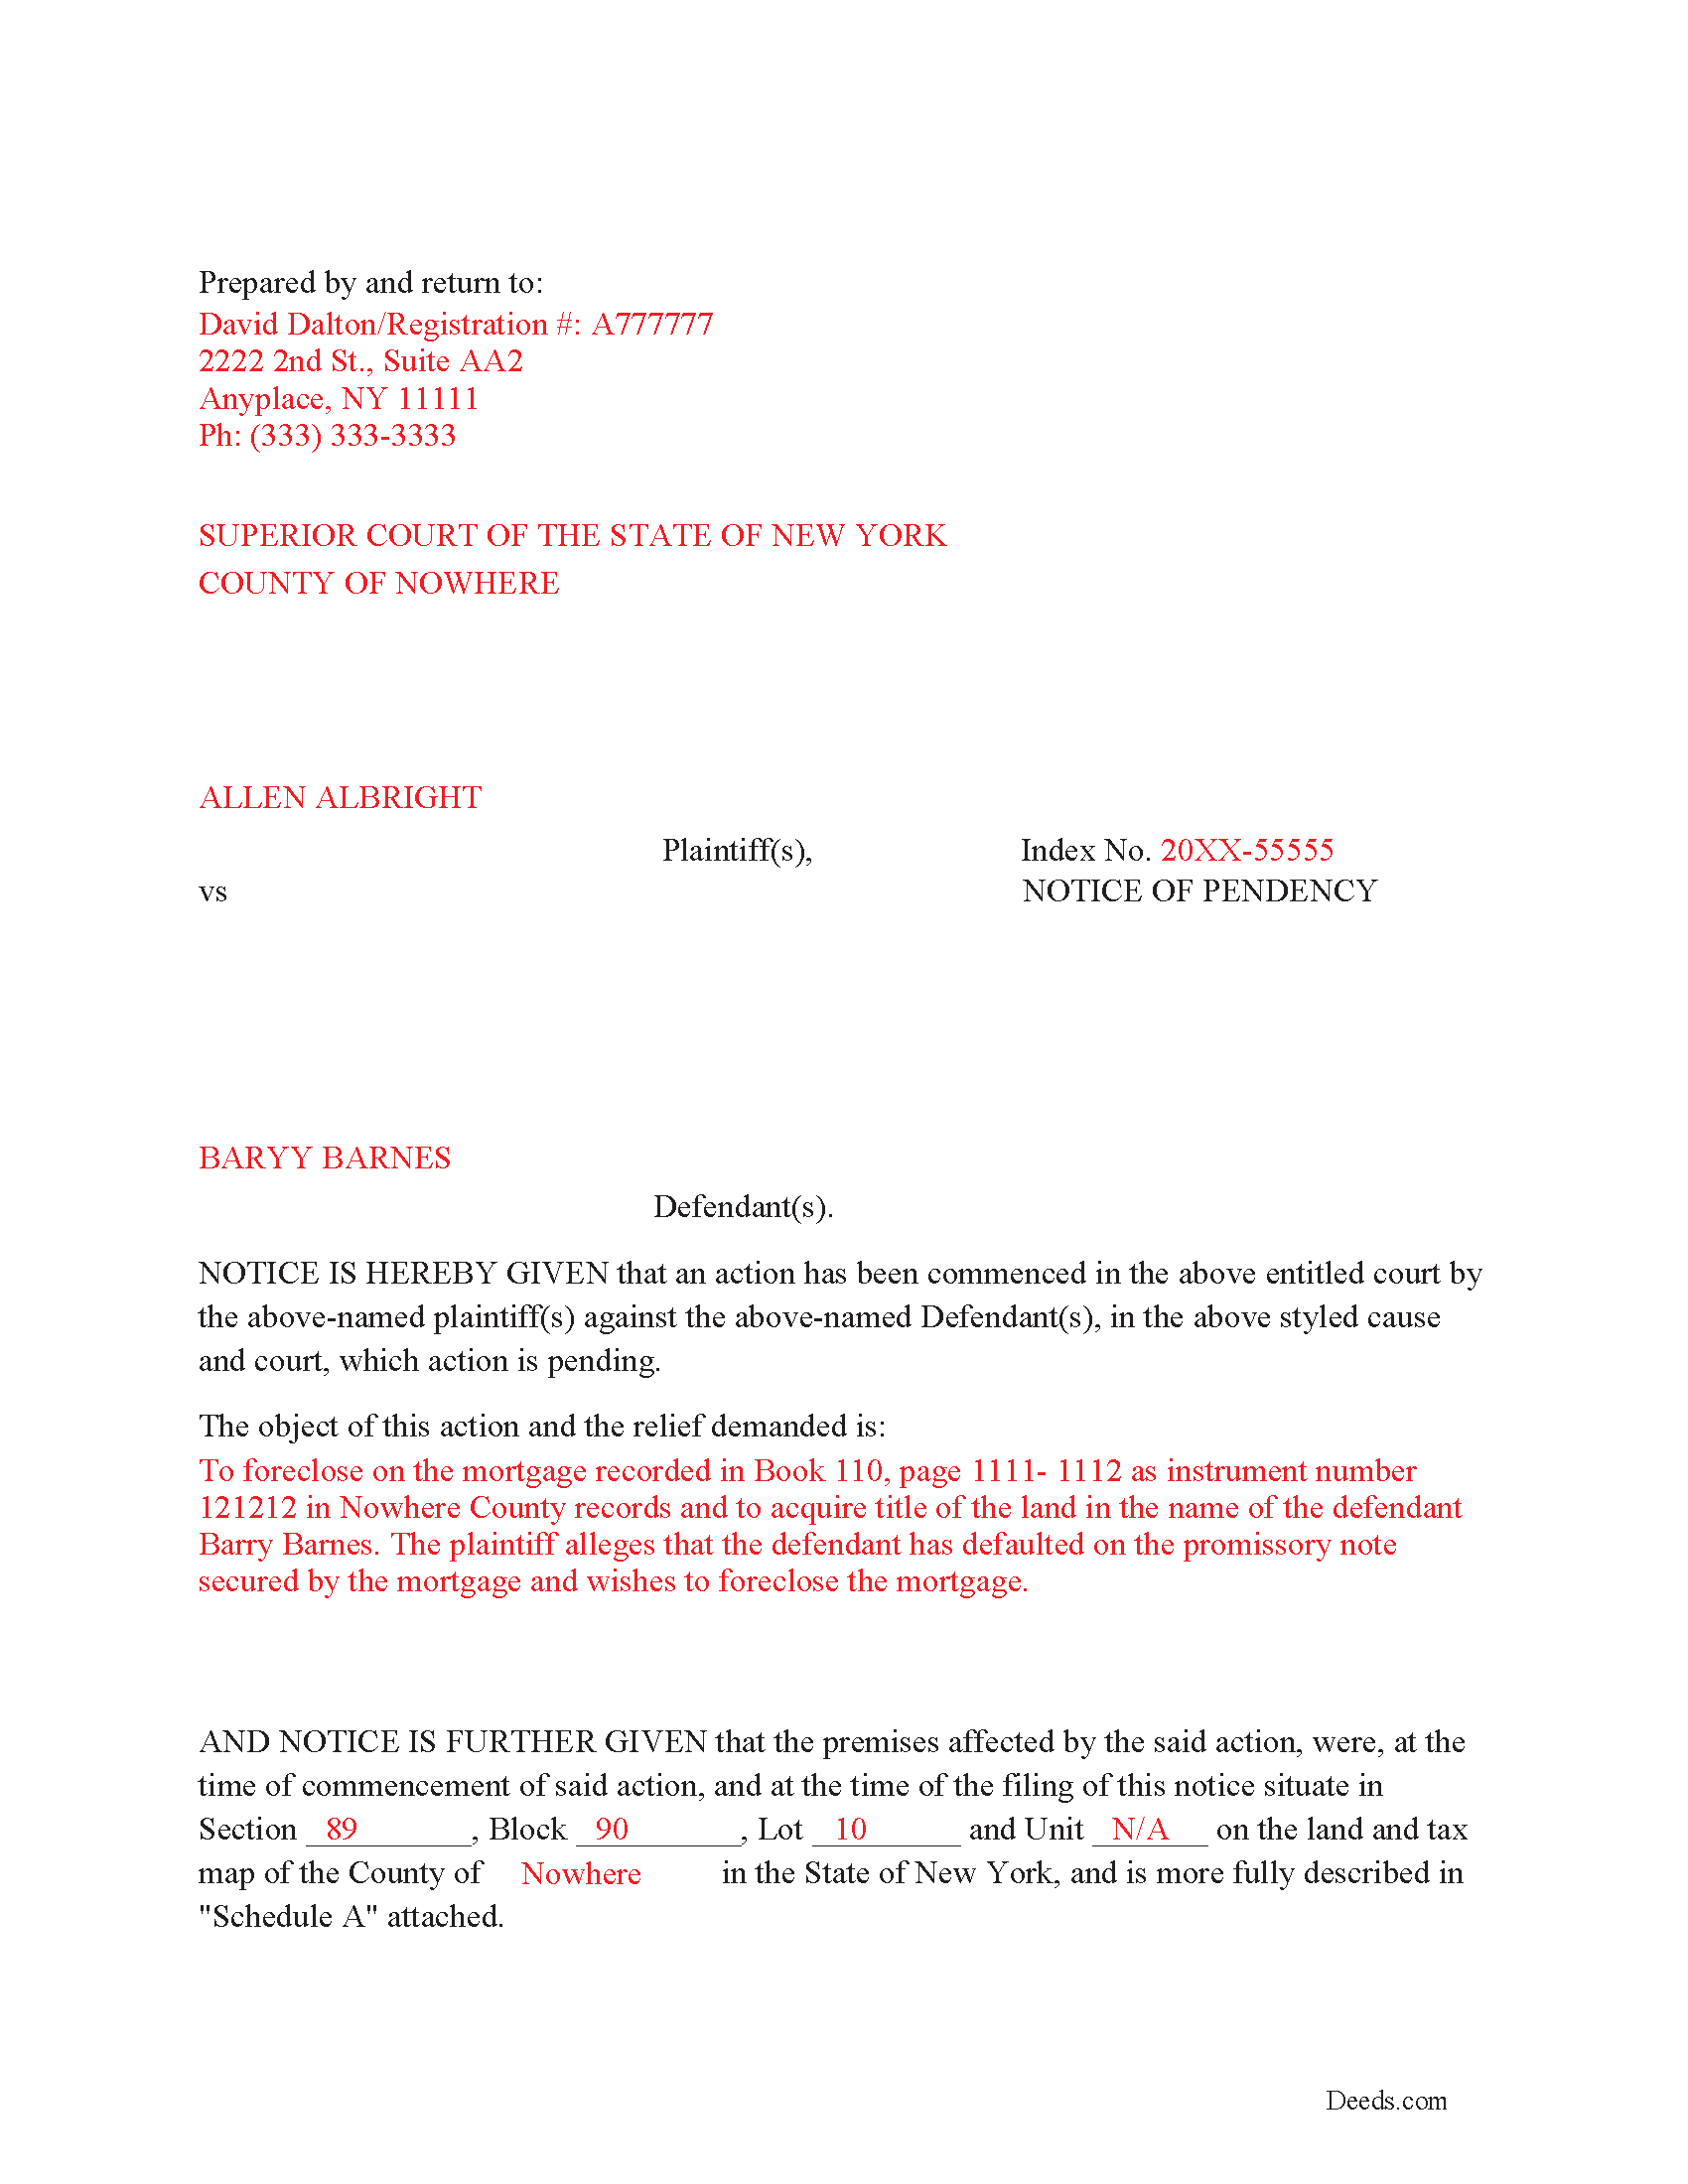 Completed Example of the Notice of Pendency Document